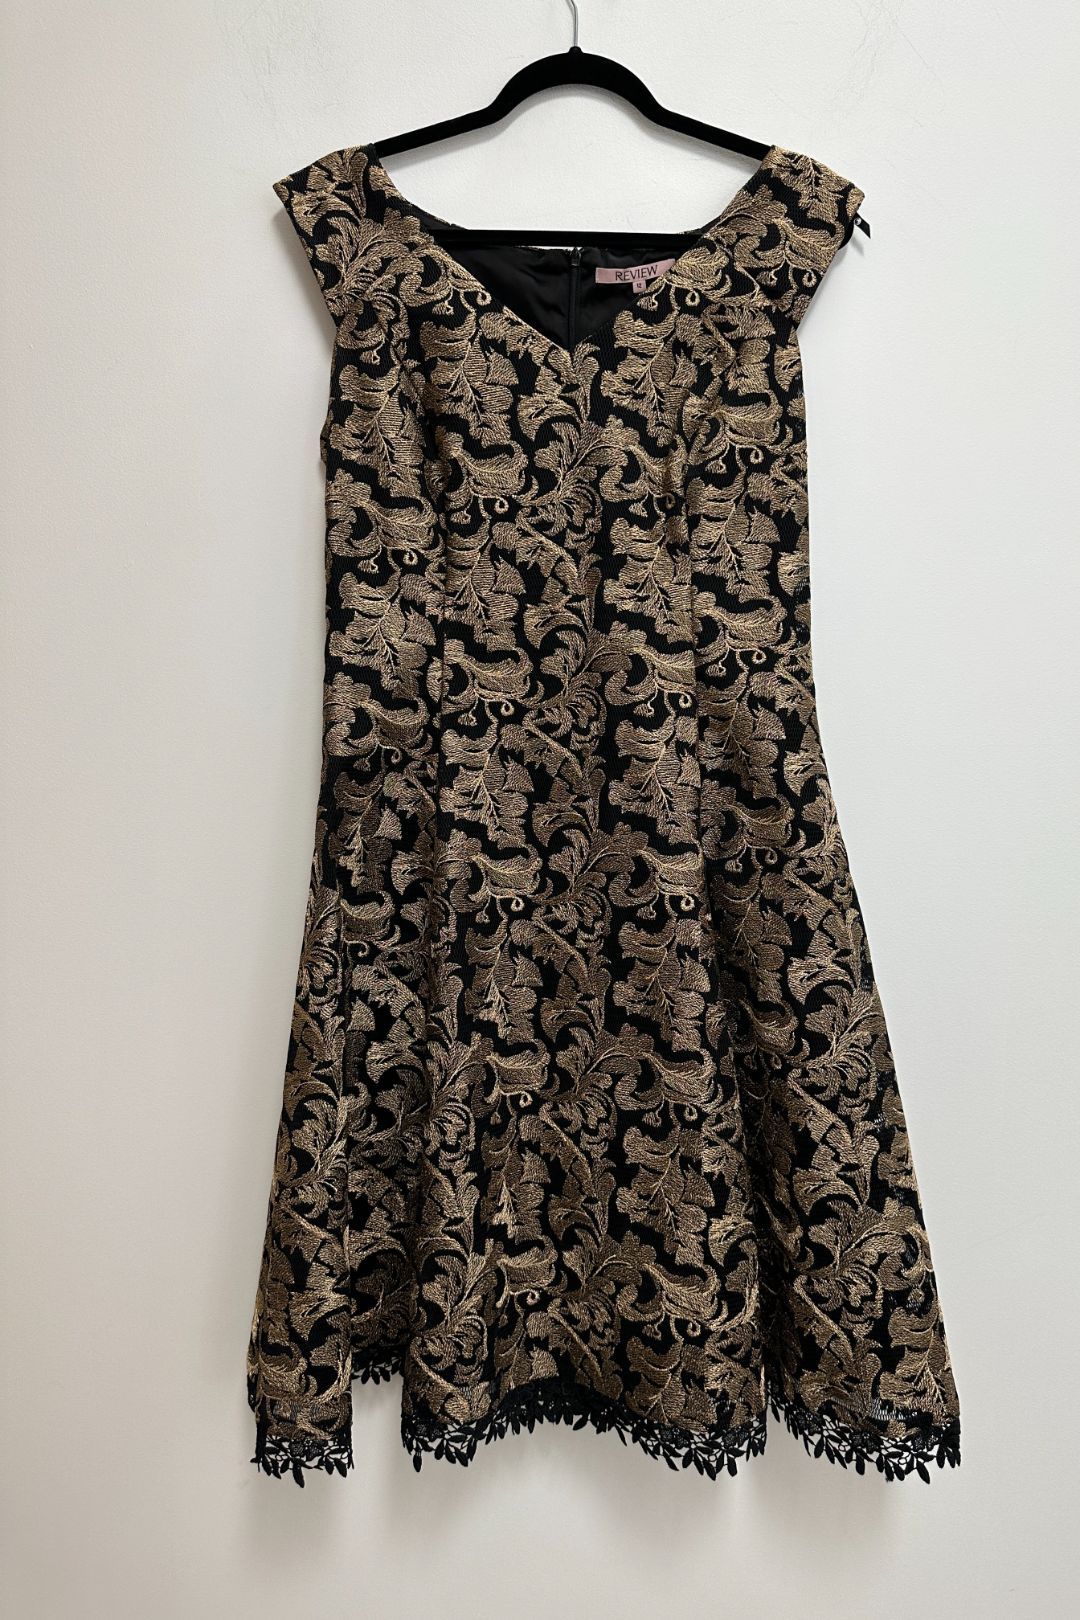 Review - Midnight In Madrid Dress in Black and Gold Floral